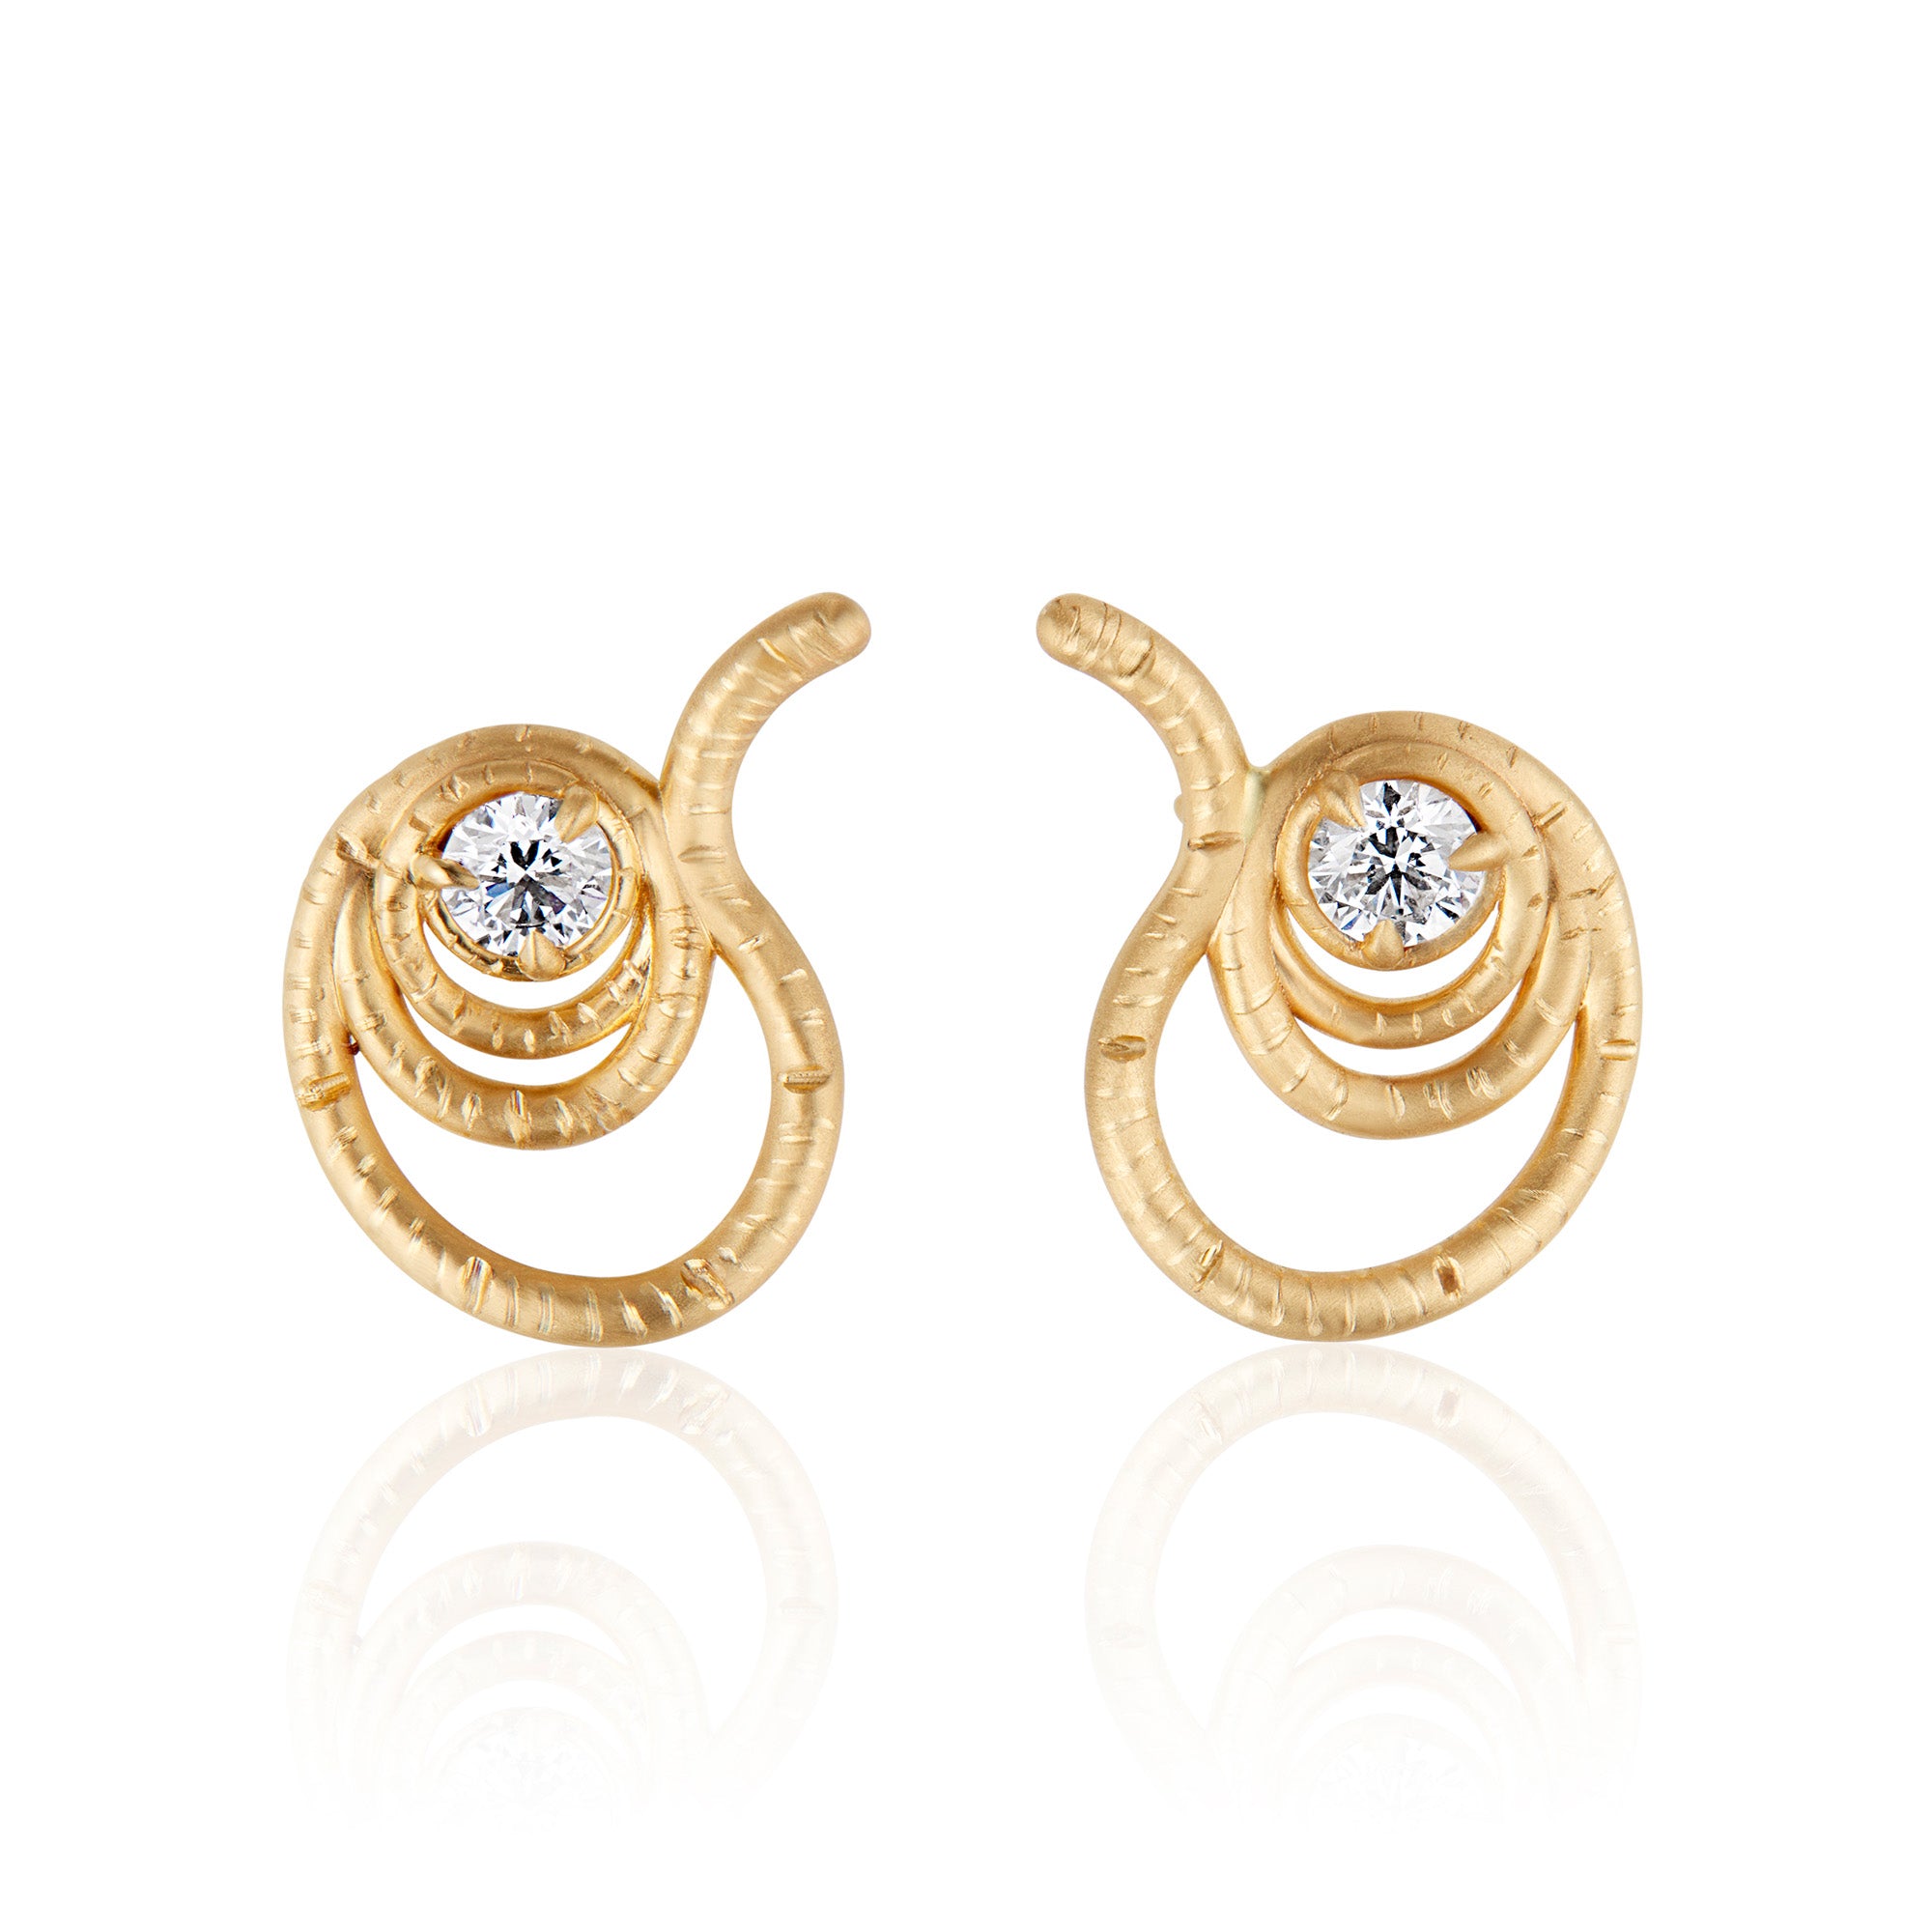 The Union Earrings representing earthworms with round DeBeers Code of Origin diamonds